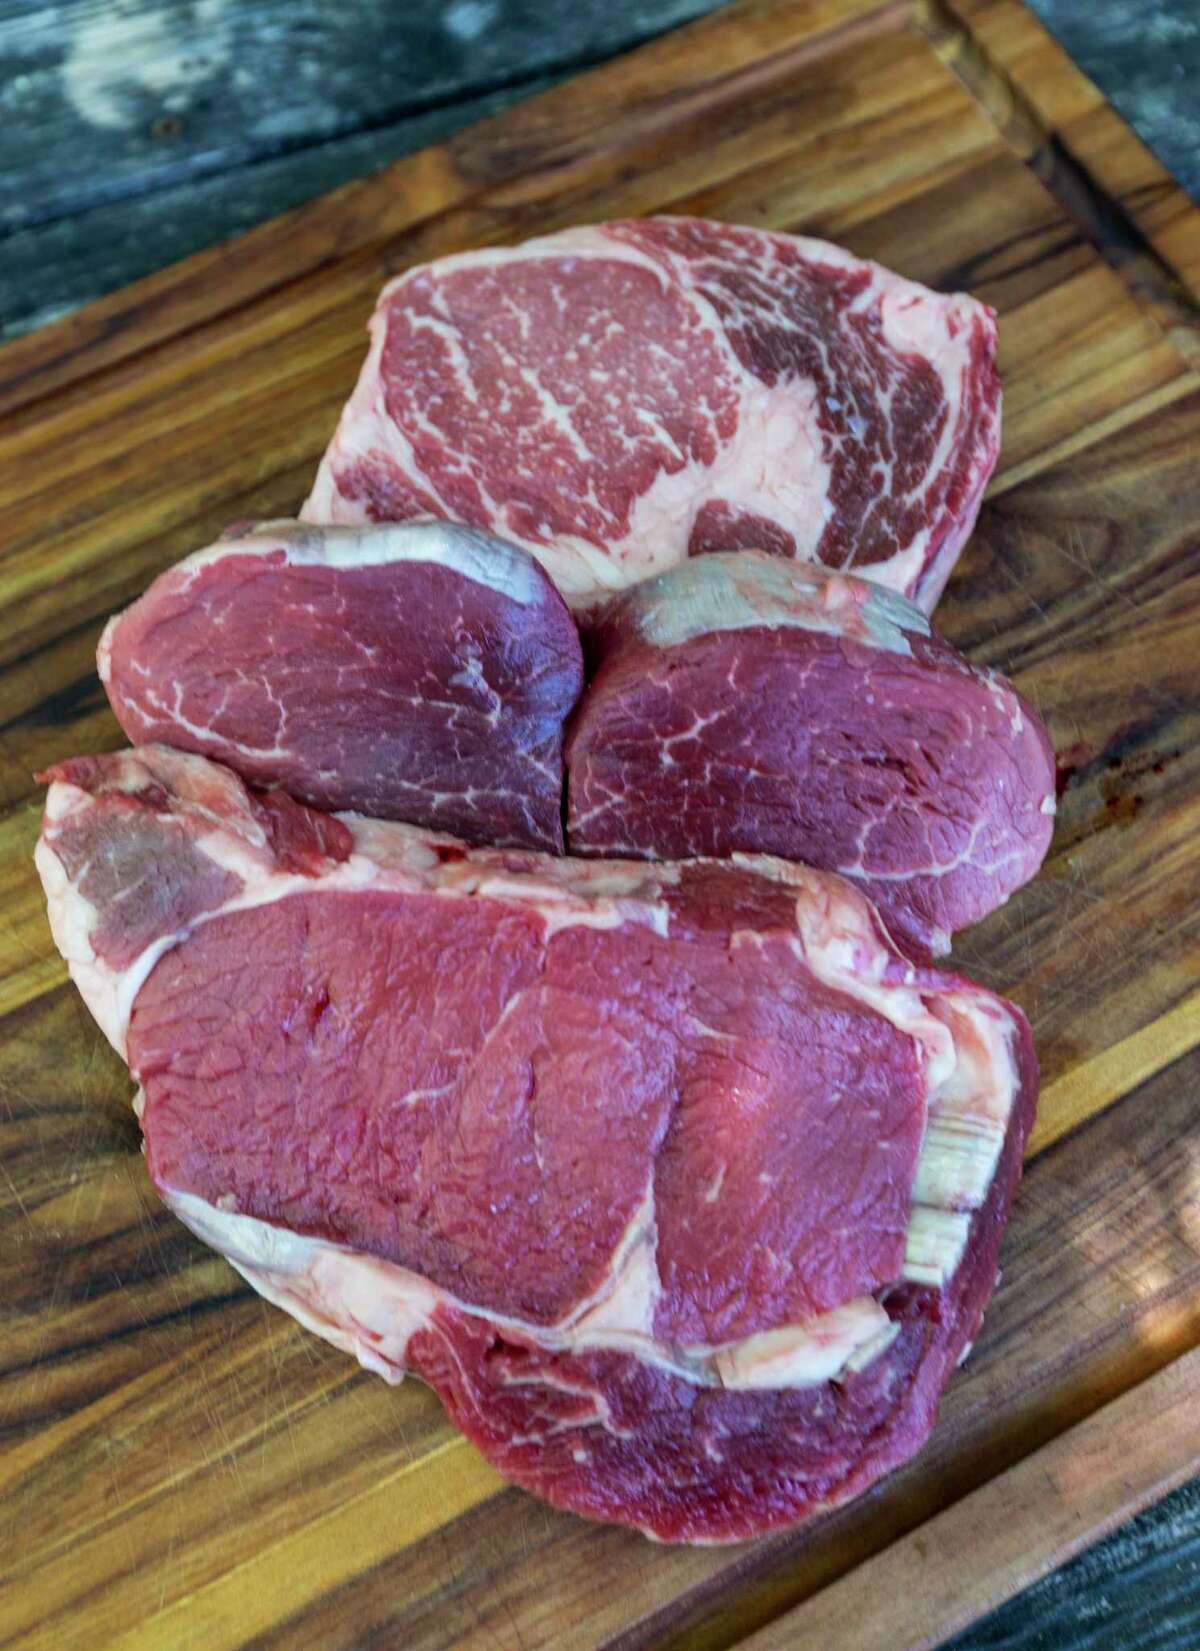 Steaks are graded based on their marbling. Pictured are (from front to back): select, choice and prime rib-eye steaks.